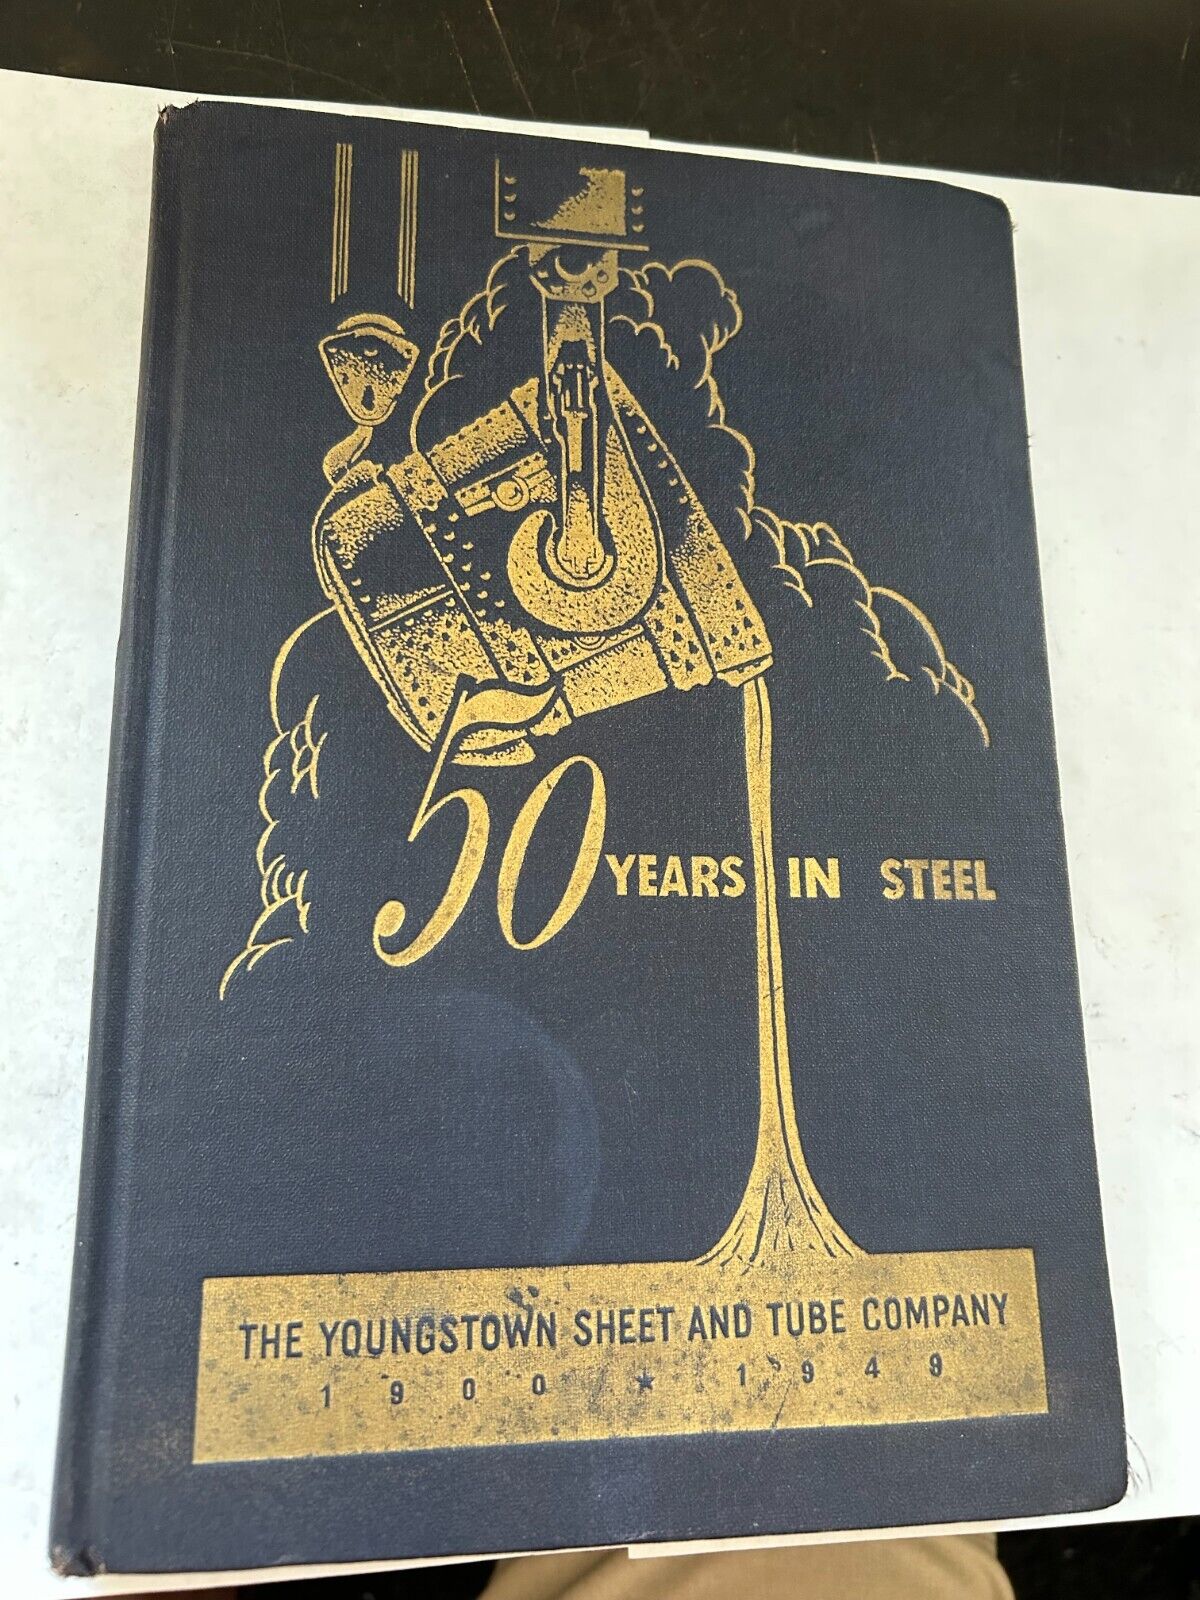 VINTAGE YOUNGSTOWN SHEET & TUBE STEEL COMPANY 1900-1948 50 YEARS IN STEEL BOOK